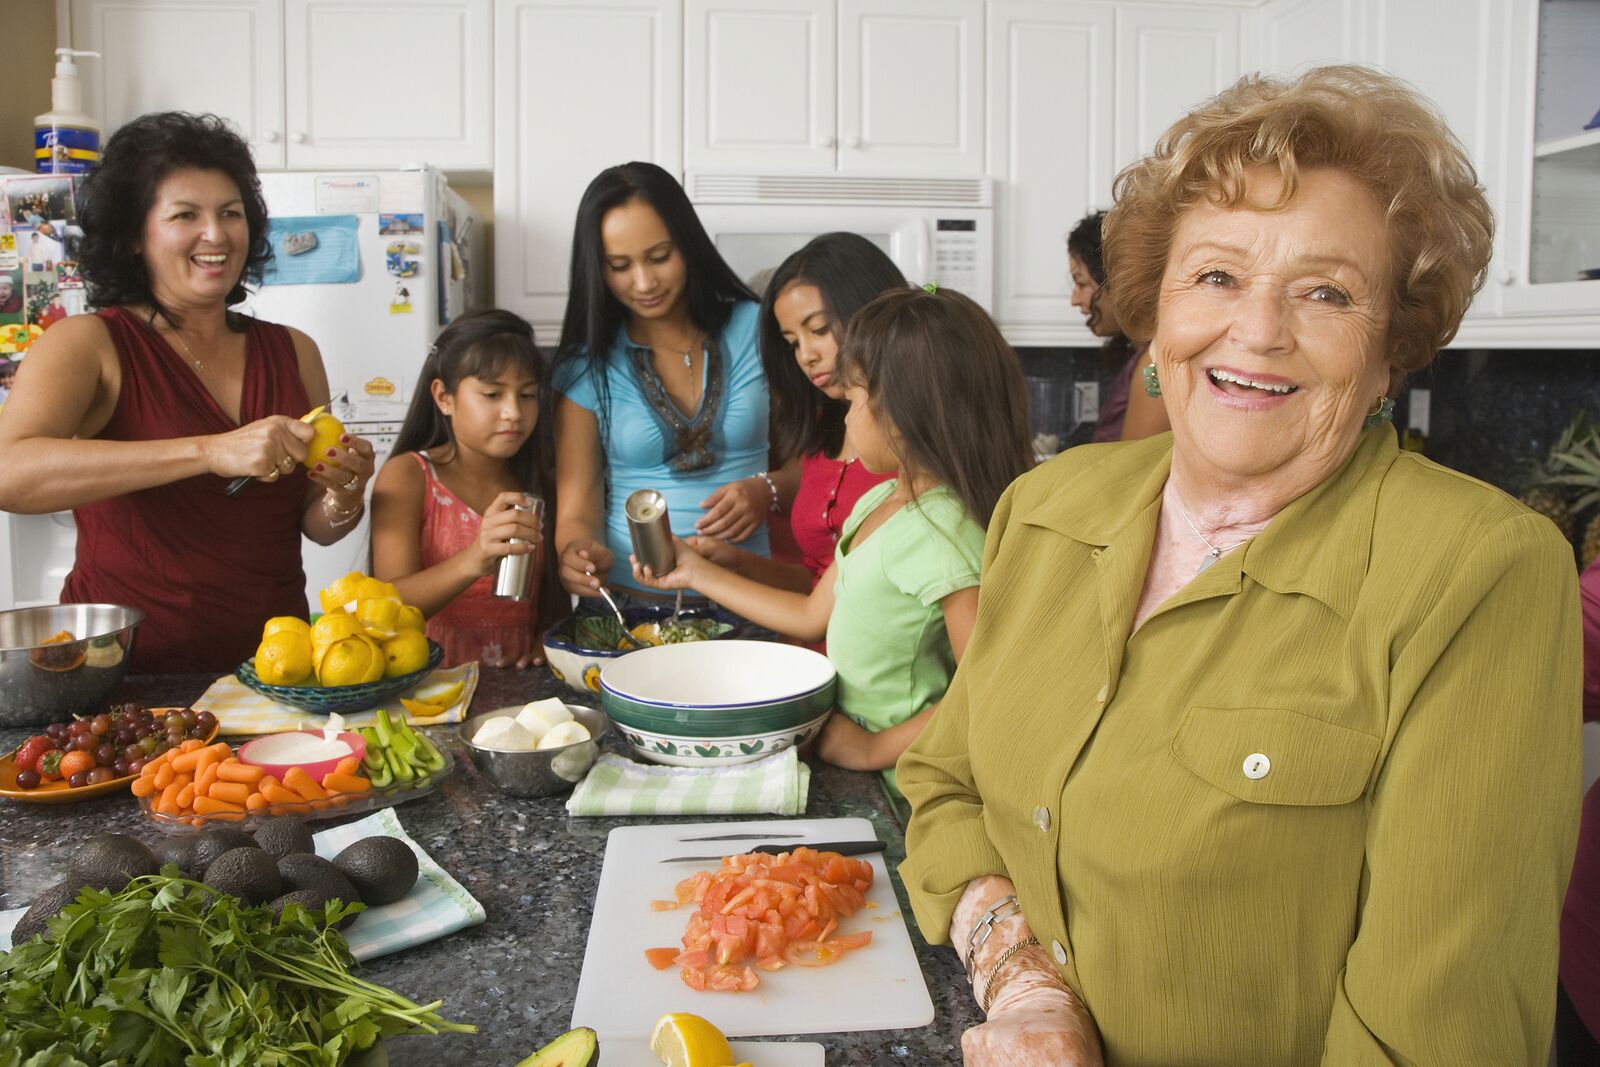 Home Care in Duluth GA: Family Sunday Supper Benefits